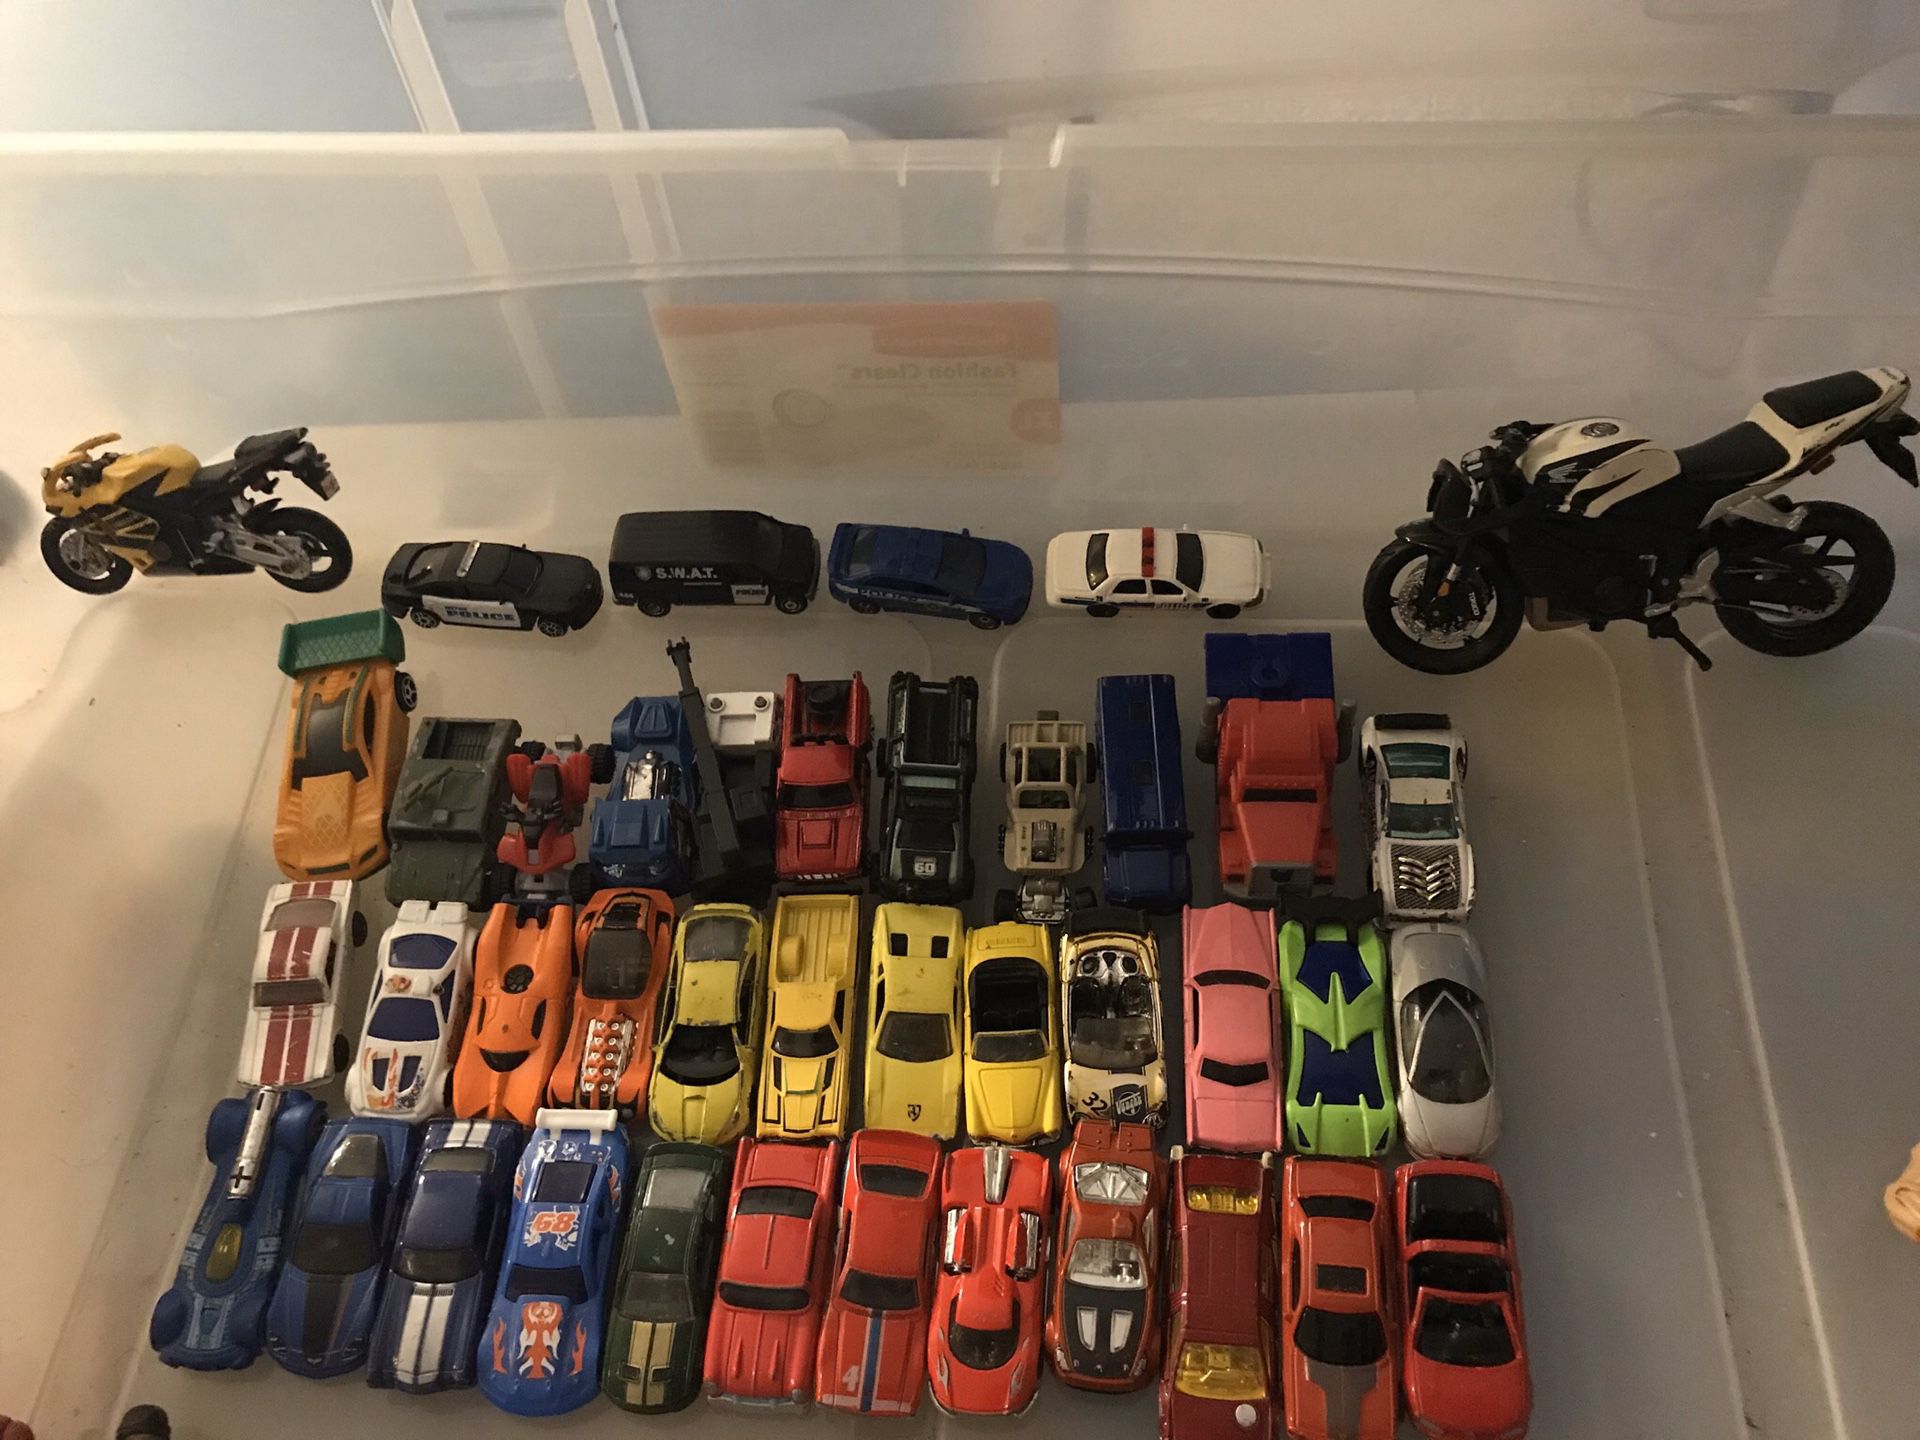 FREE (34) race cars with (2) Motorcycles (5) Police Cars